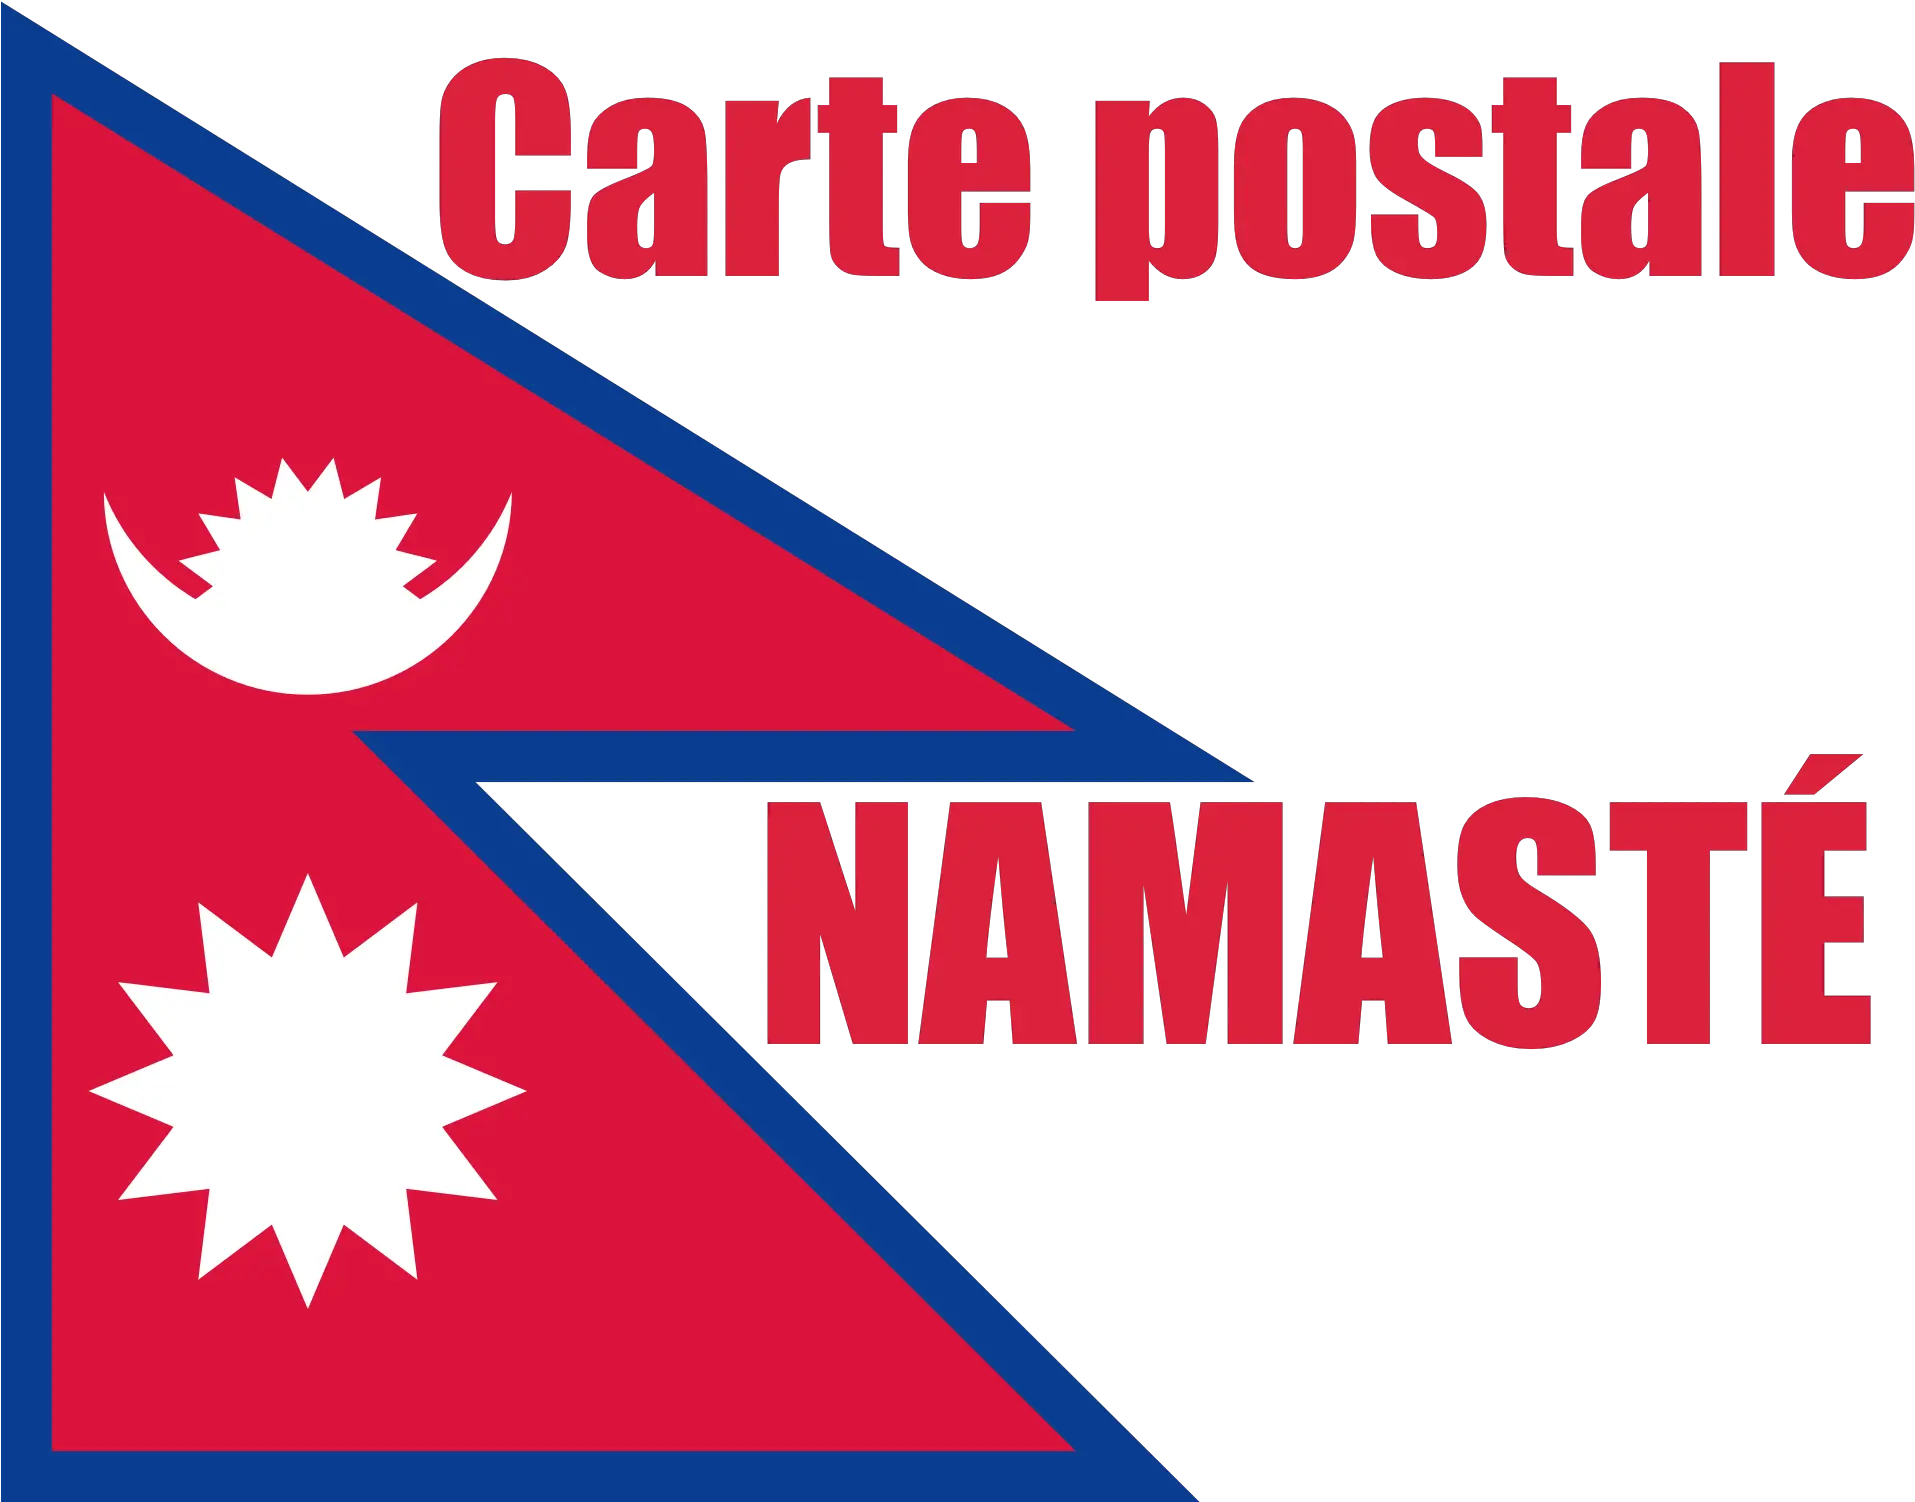 Download Flag Of Nepal Png Image With No Background Pngkeycom Flag Of Nepal Nepal Flag Png